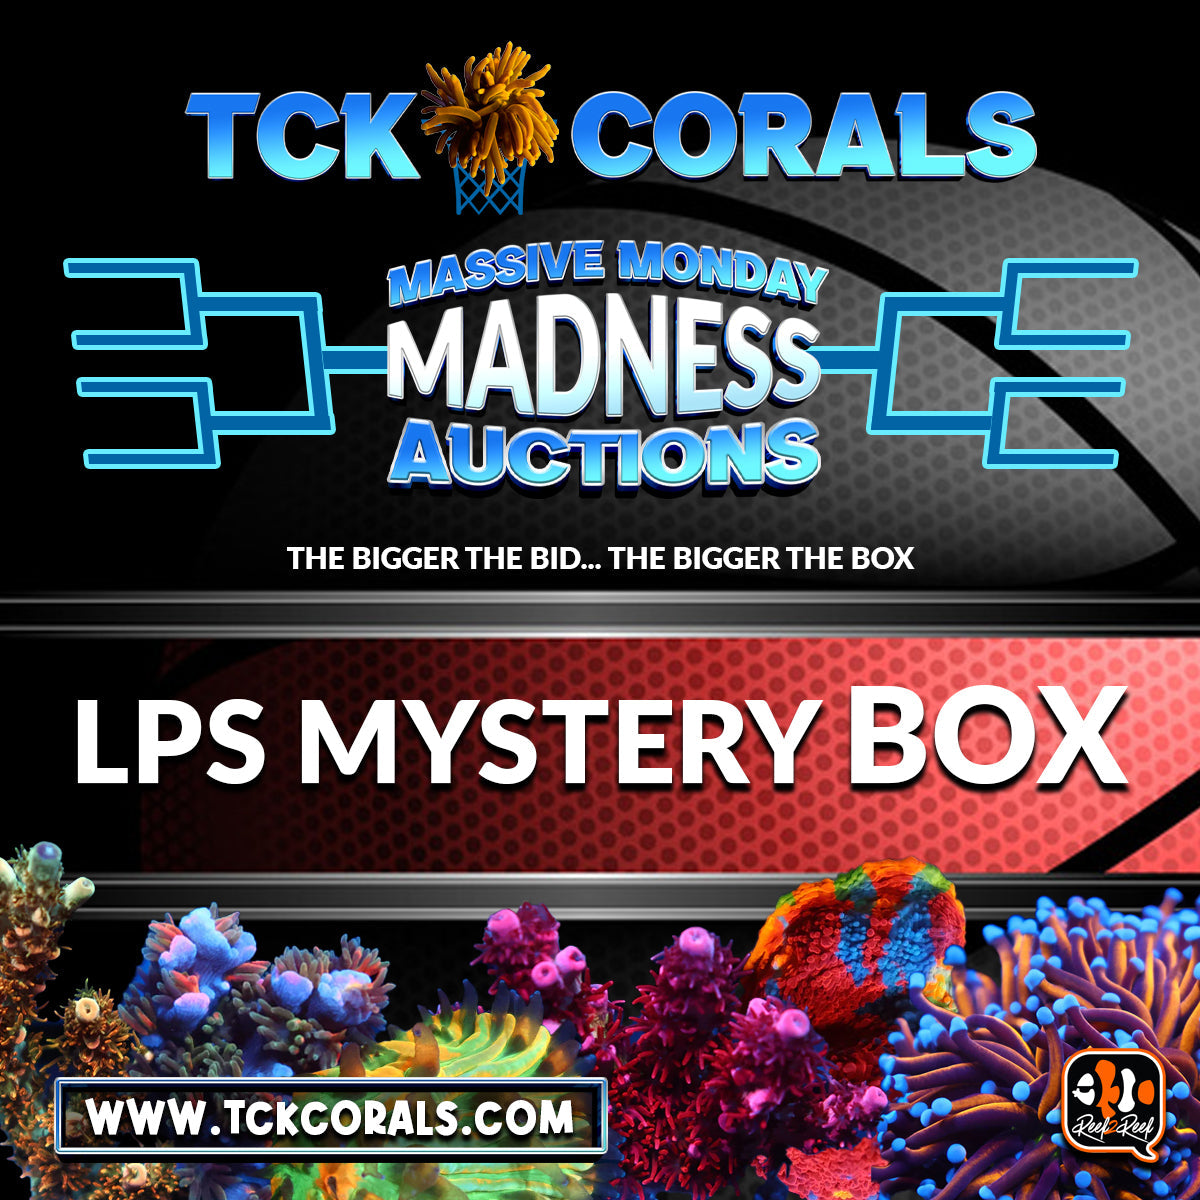 LPS MYSTERY BOX